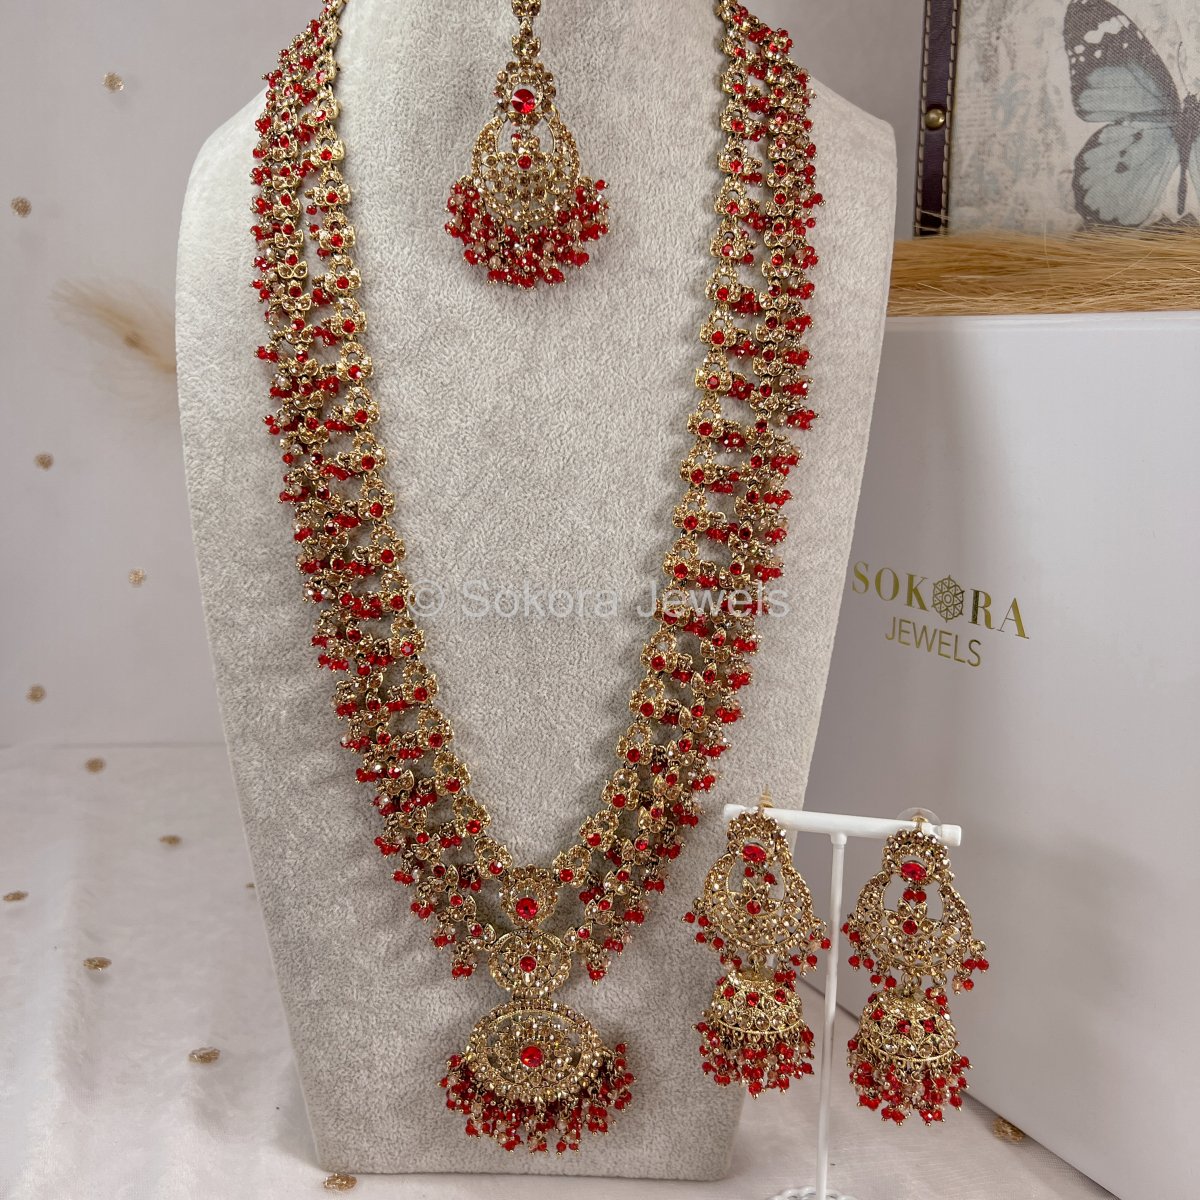 Handmade Antique Gold Finish Long Necklace and Earrings Set with Pearls,  Onyx Beads and Kamp Stones | Indian Jewelry | Handmade Jewelry – Kaash